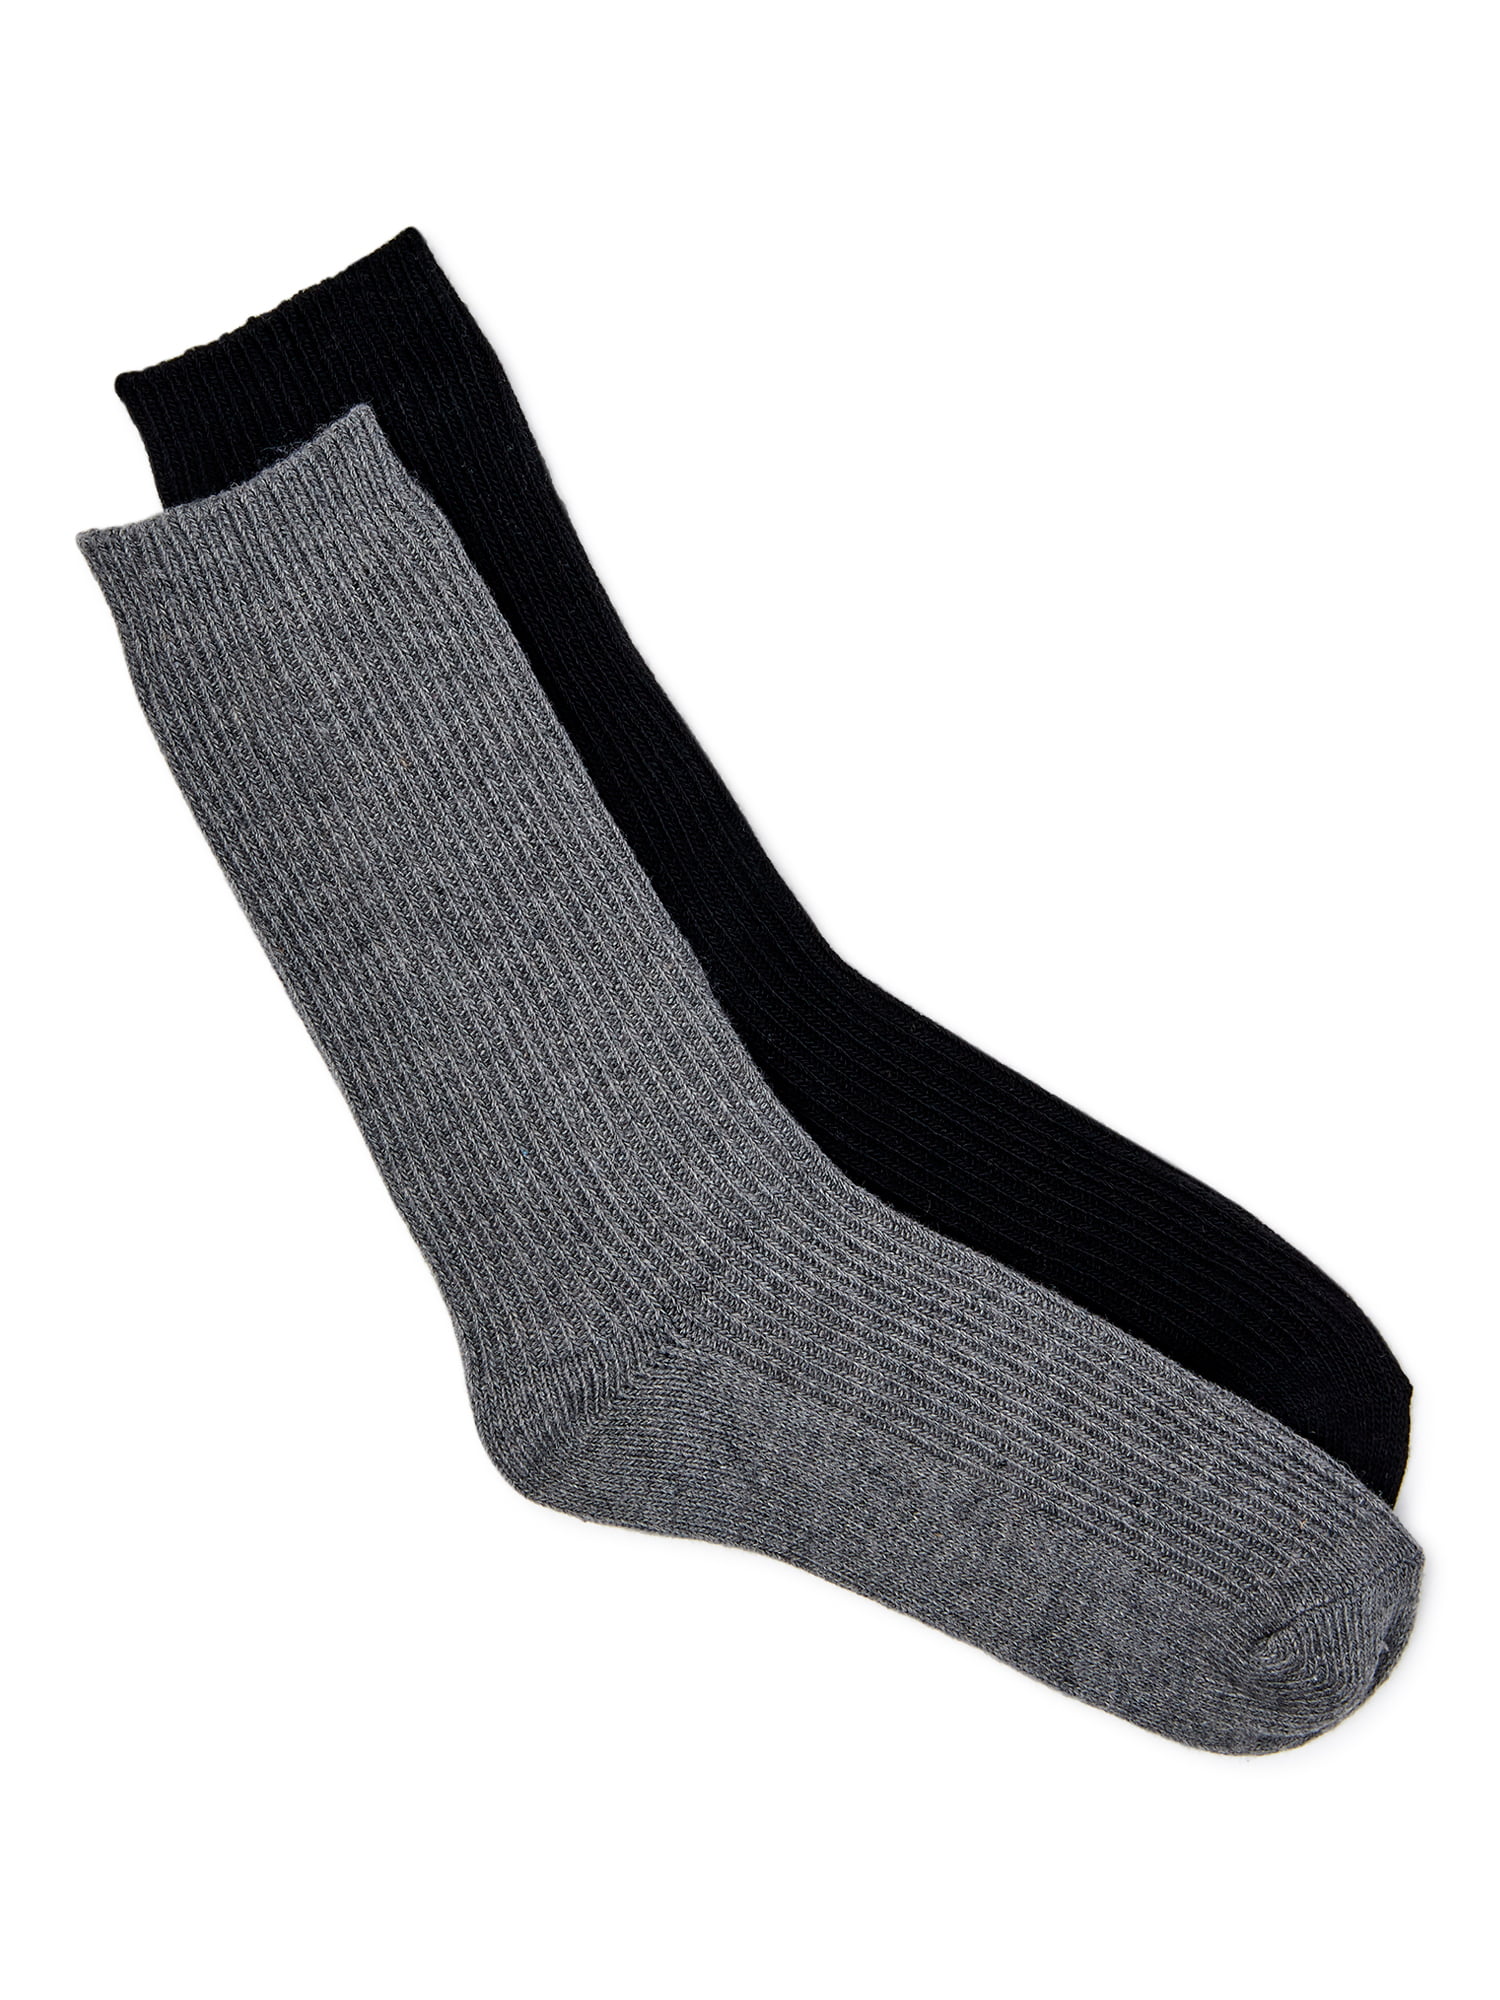 Women 90%Cashmere Wool High Solid Thick Winter Warm Soft Comfort Boot Socks 